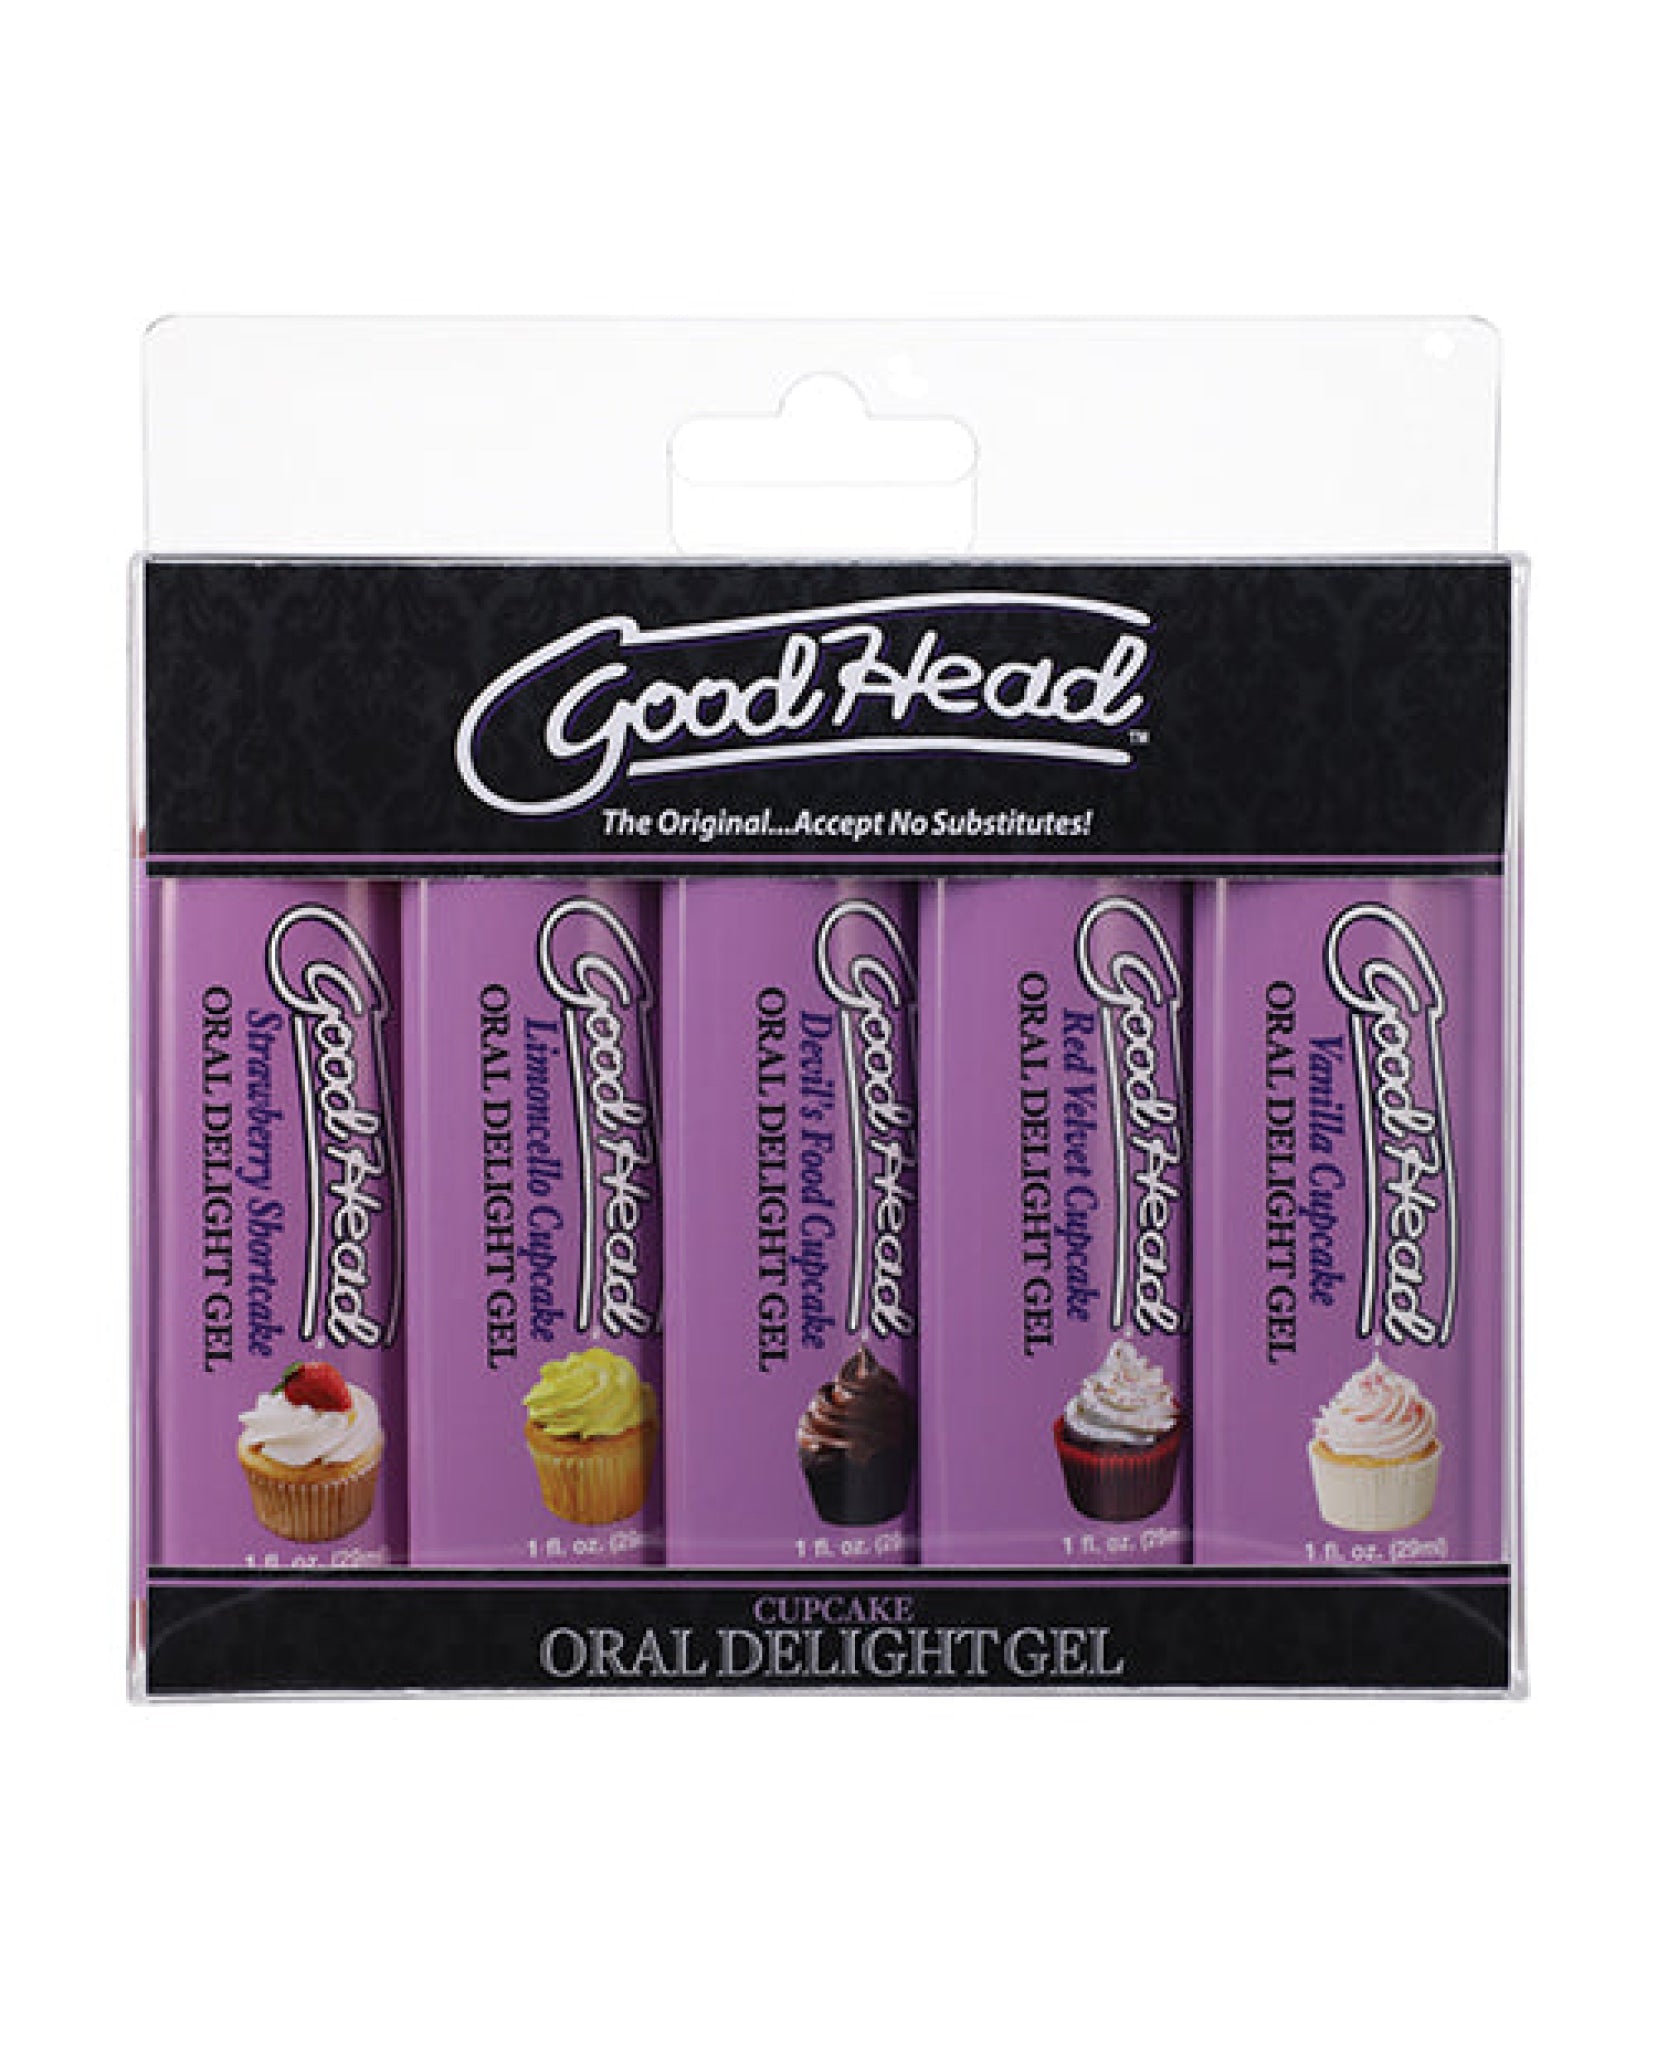 Goodhead Tropical Fruits Oral Delight Gel - Asst. Flavors Pack Of 5 Doc Johnson